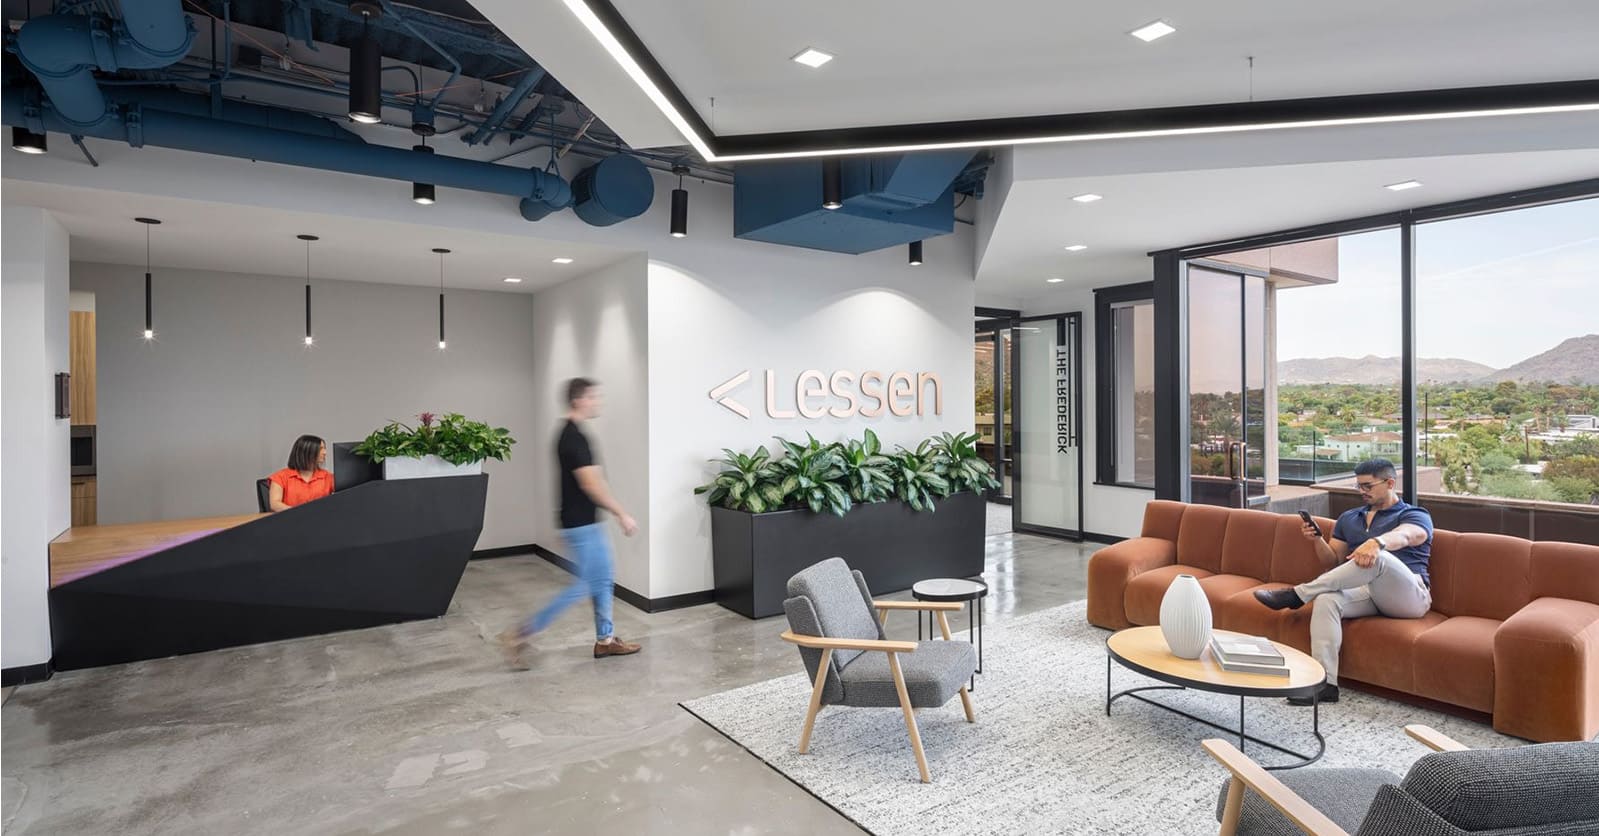 Construction Completed for Lessen HQ in Scottsdale